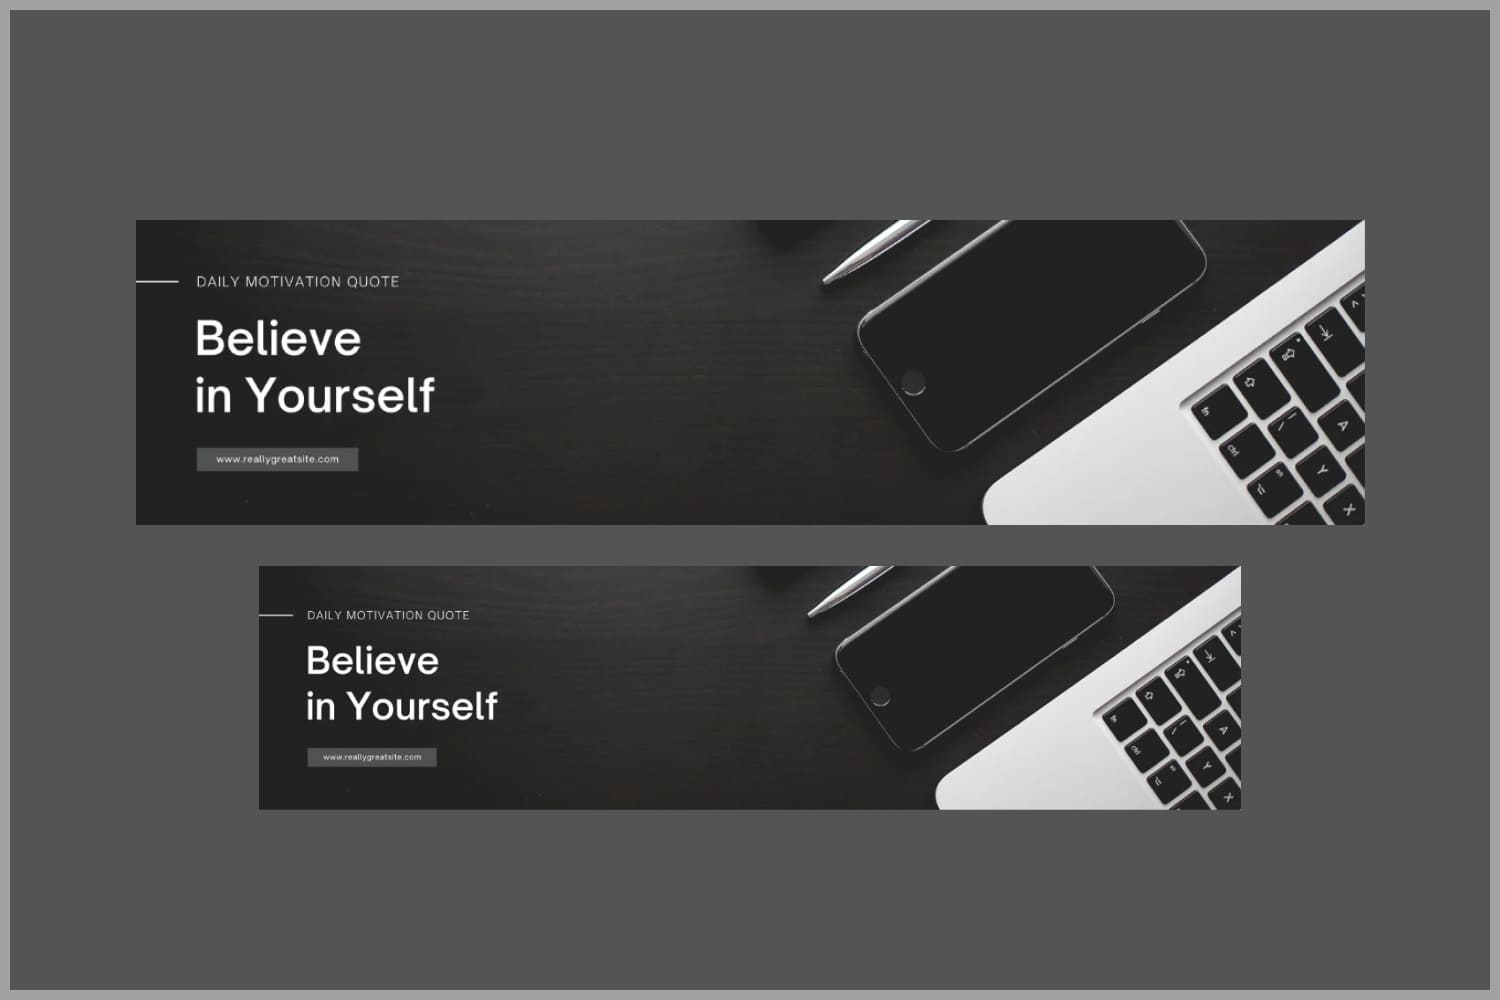 Linkedin banners with photo of laptop, phone and pen on black background.